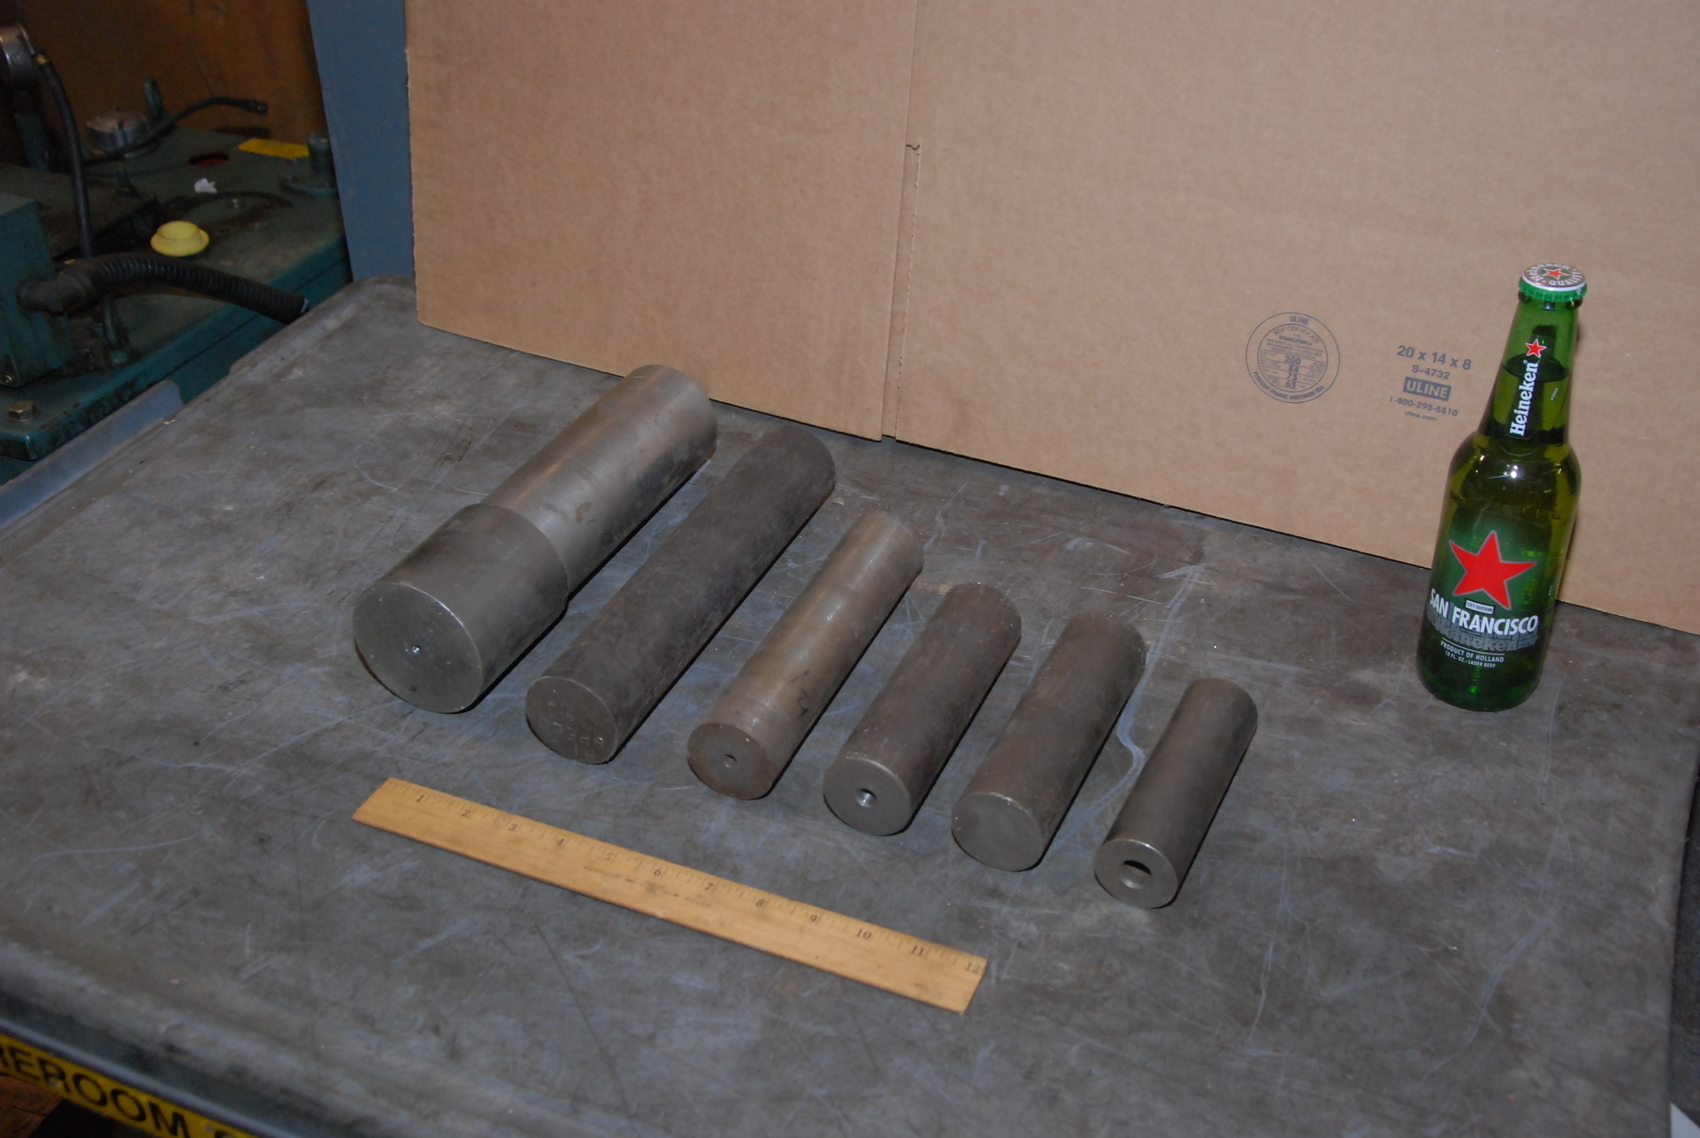 Lot of 6 Round Steel Bars For Press Blacksmith Anvil;42 lbs.